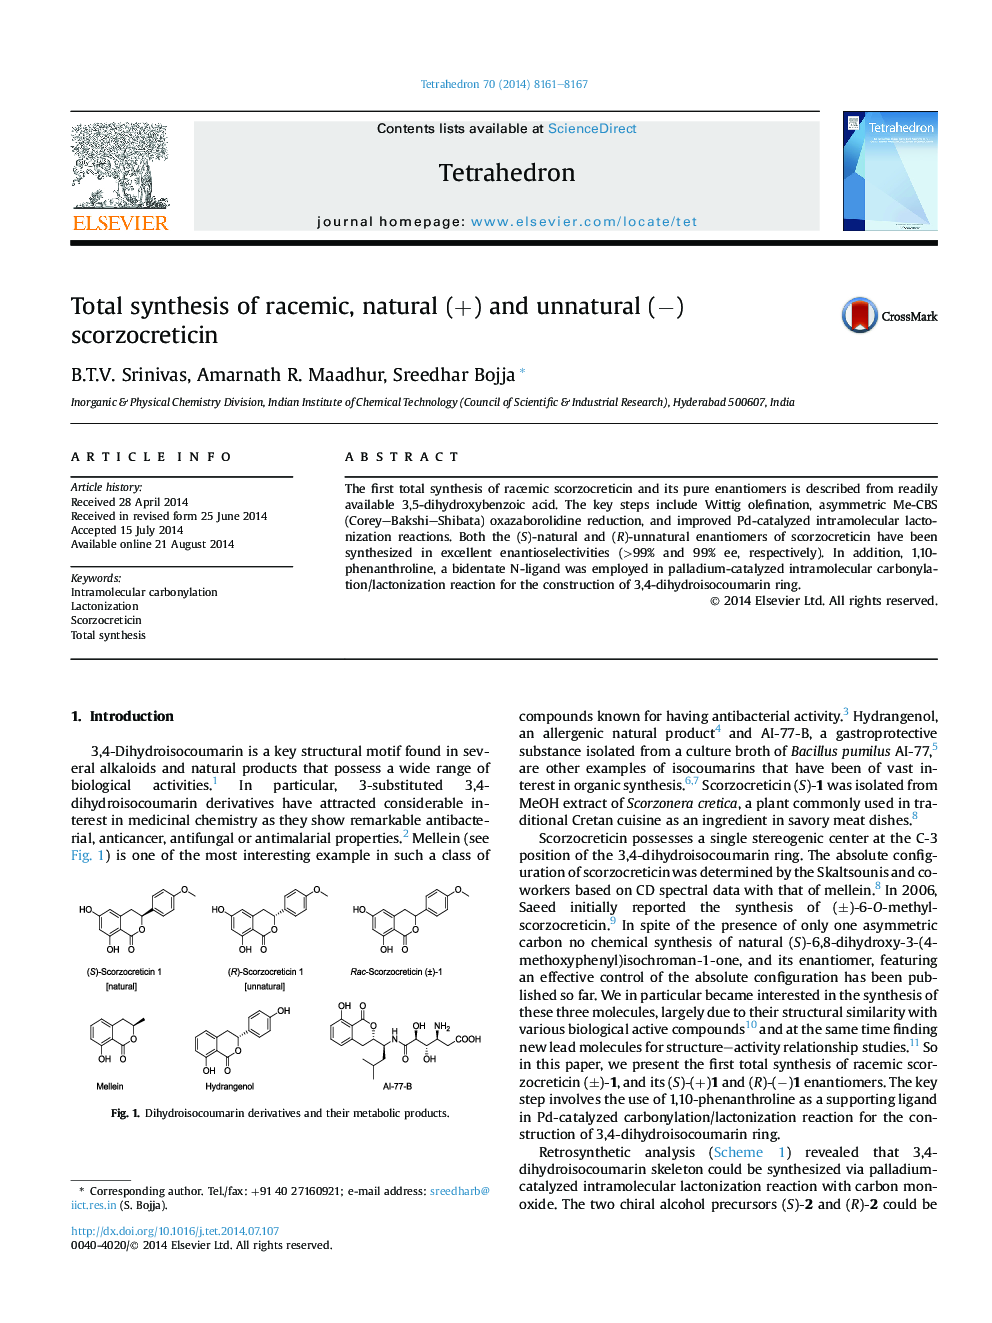 Total synthesis of racemic, natural (+) and unnatural (â) scorzocreticin